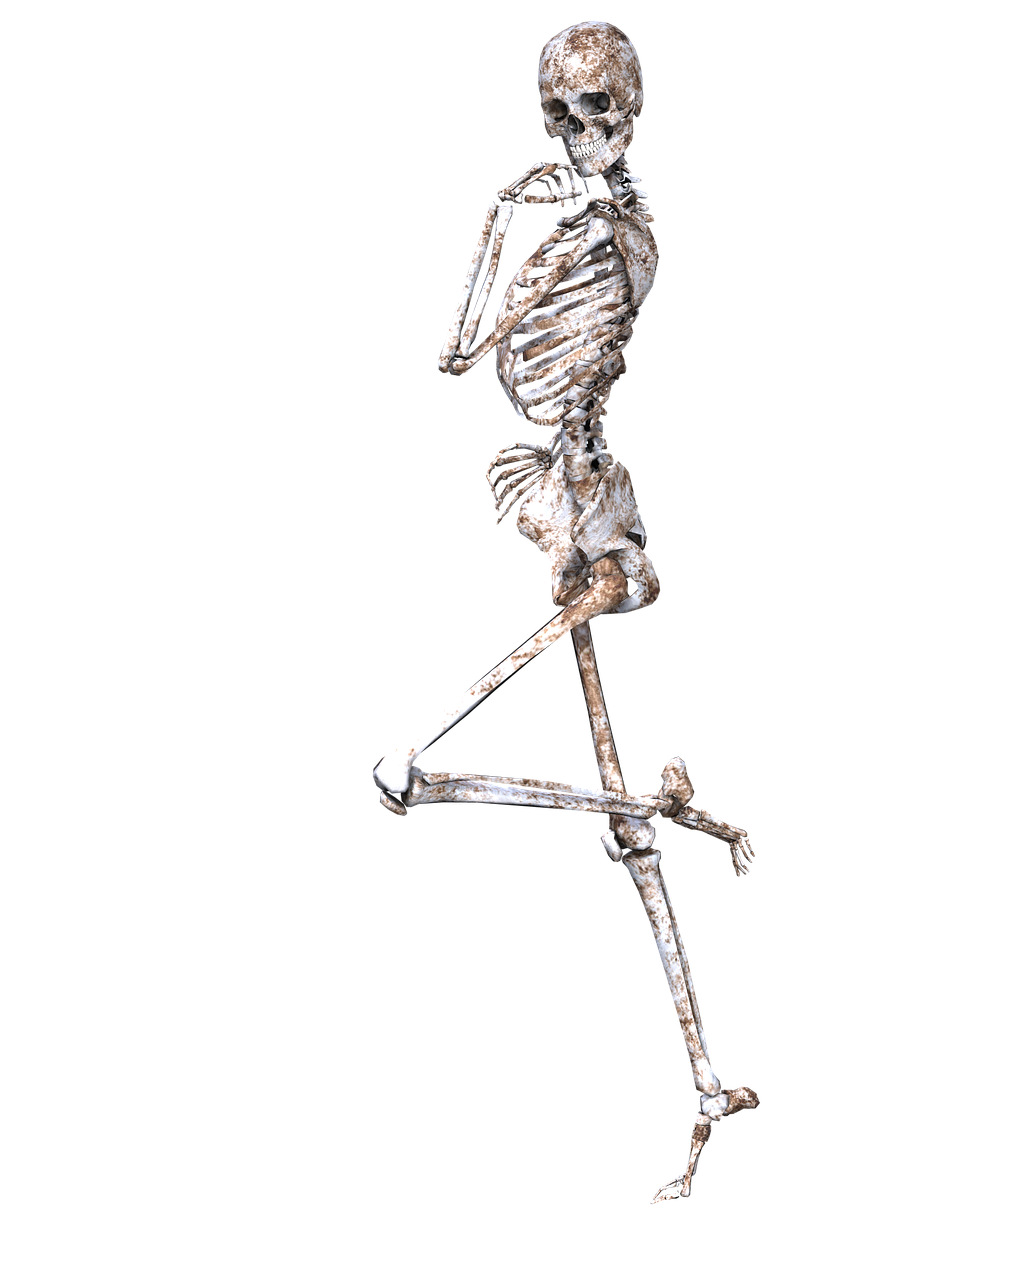 a skeleton that is standing in the air, by Muirhead Bone, featured on zbrush central, cigarette dangling, hinged titanium legs, tired haunted expression, distant full body view